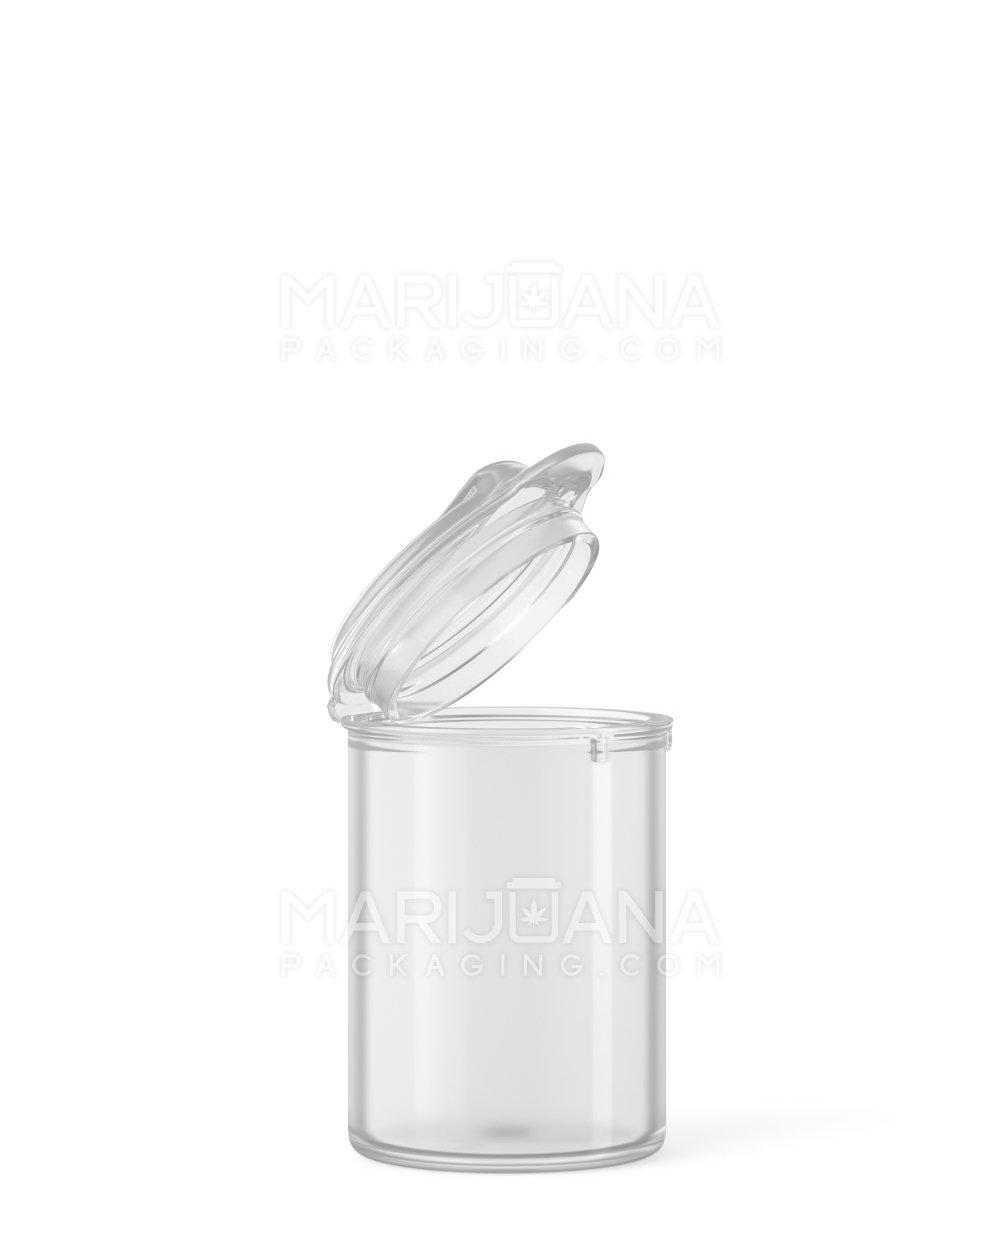 Pop Top Concentrate Containers | 5mL - Clear - 100 Count - 1